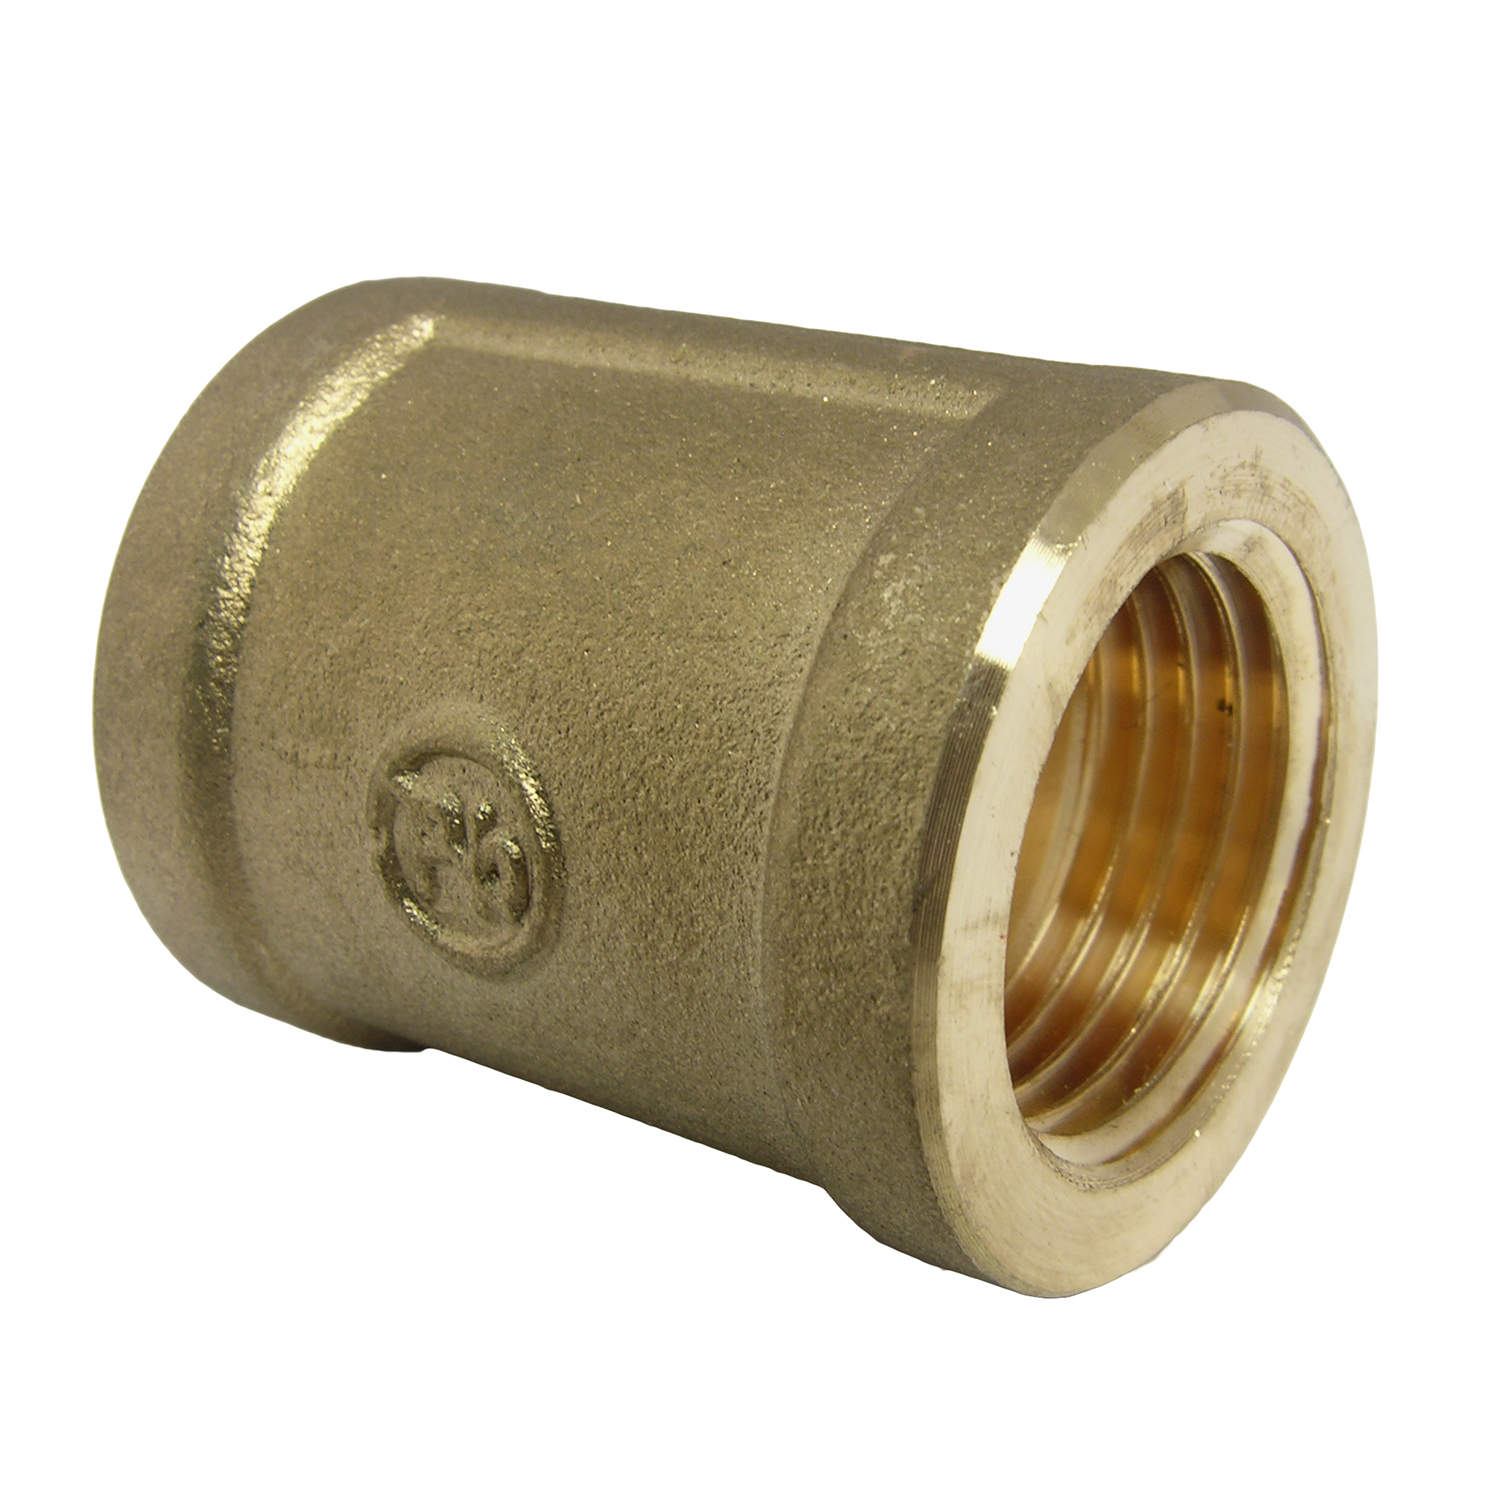 Lasco 17-9227 Pipe Coupling, 1/2 in, FPT, Brass